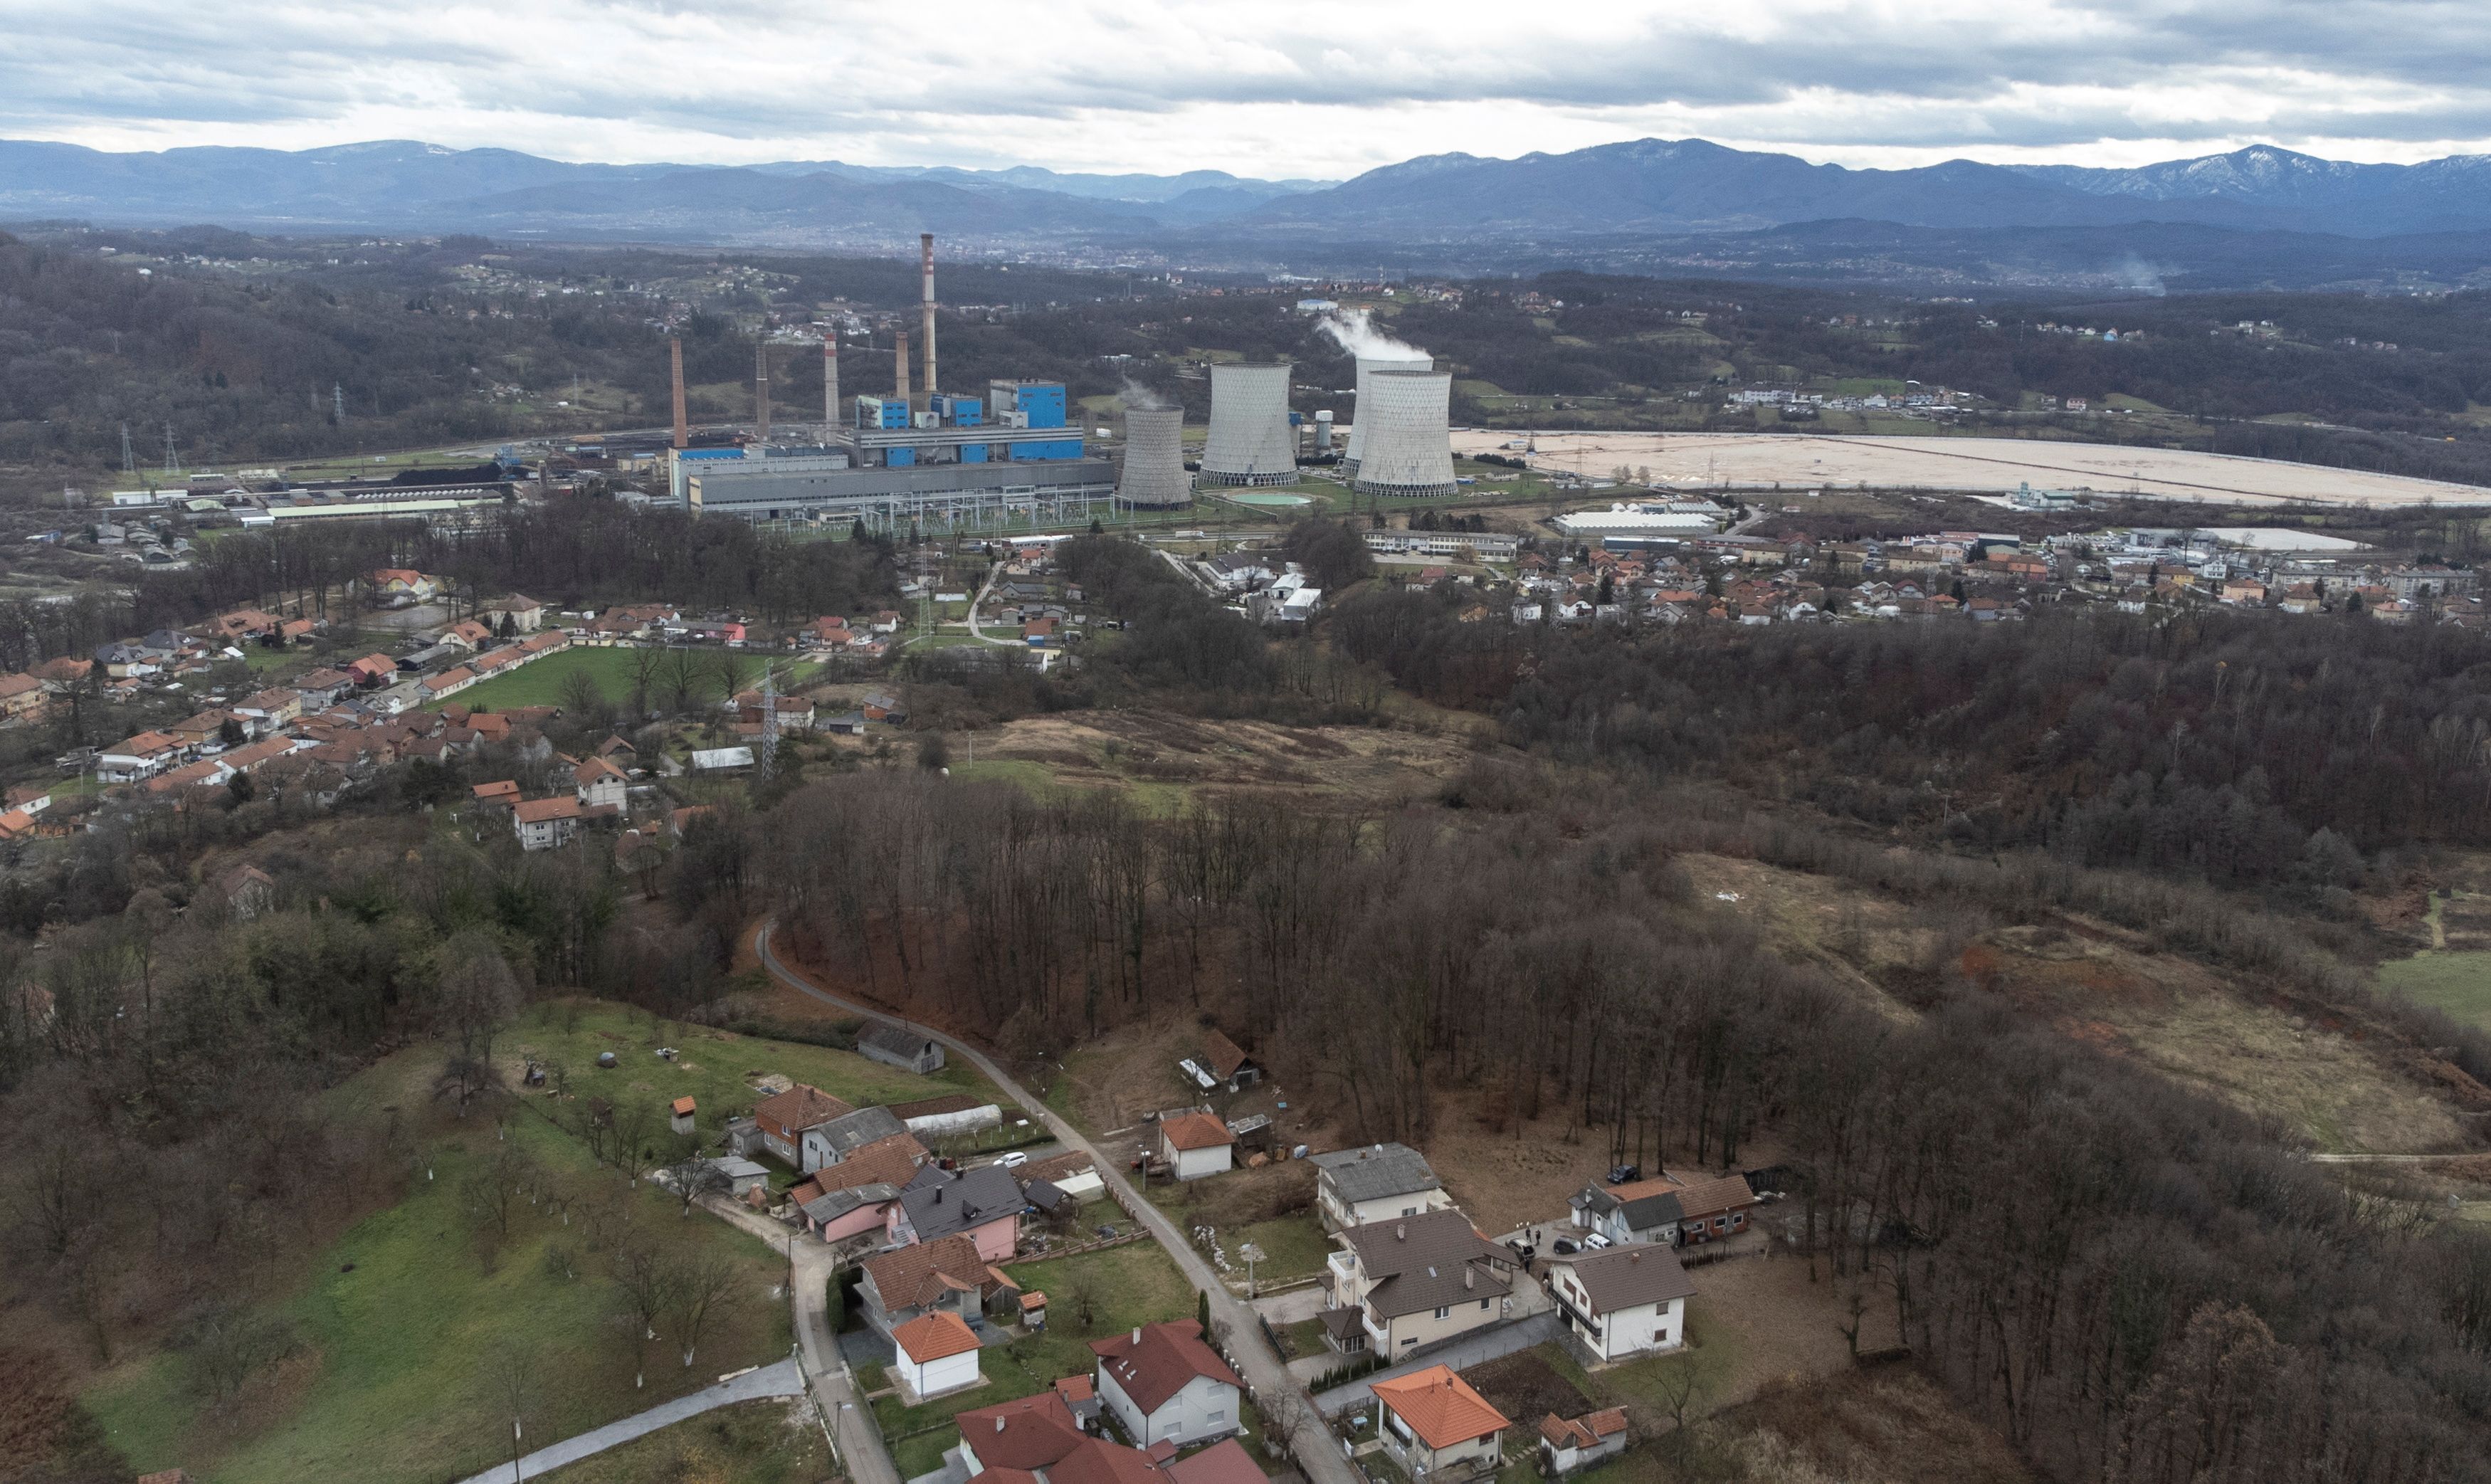 Settlement Bukinje near Thermal Power Plant is seen in this aerial shoot in Tuzla